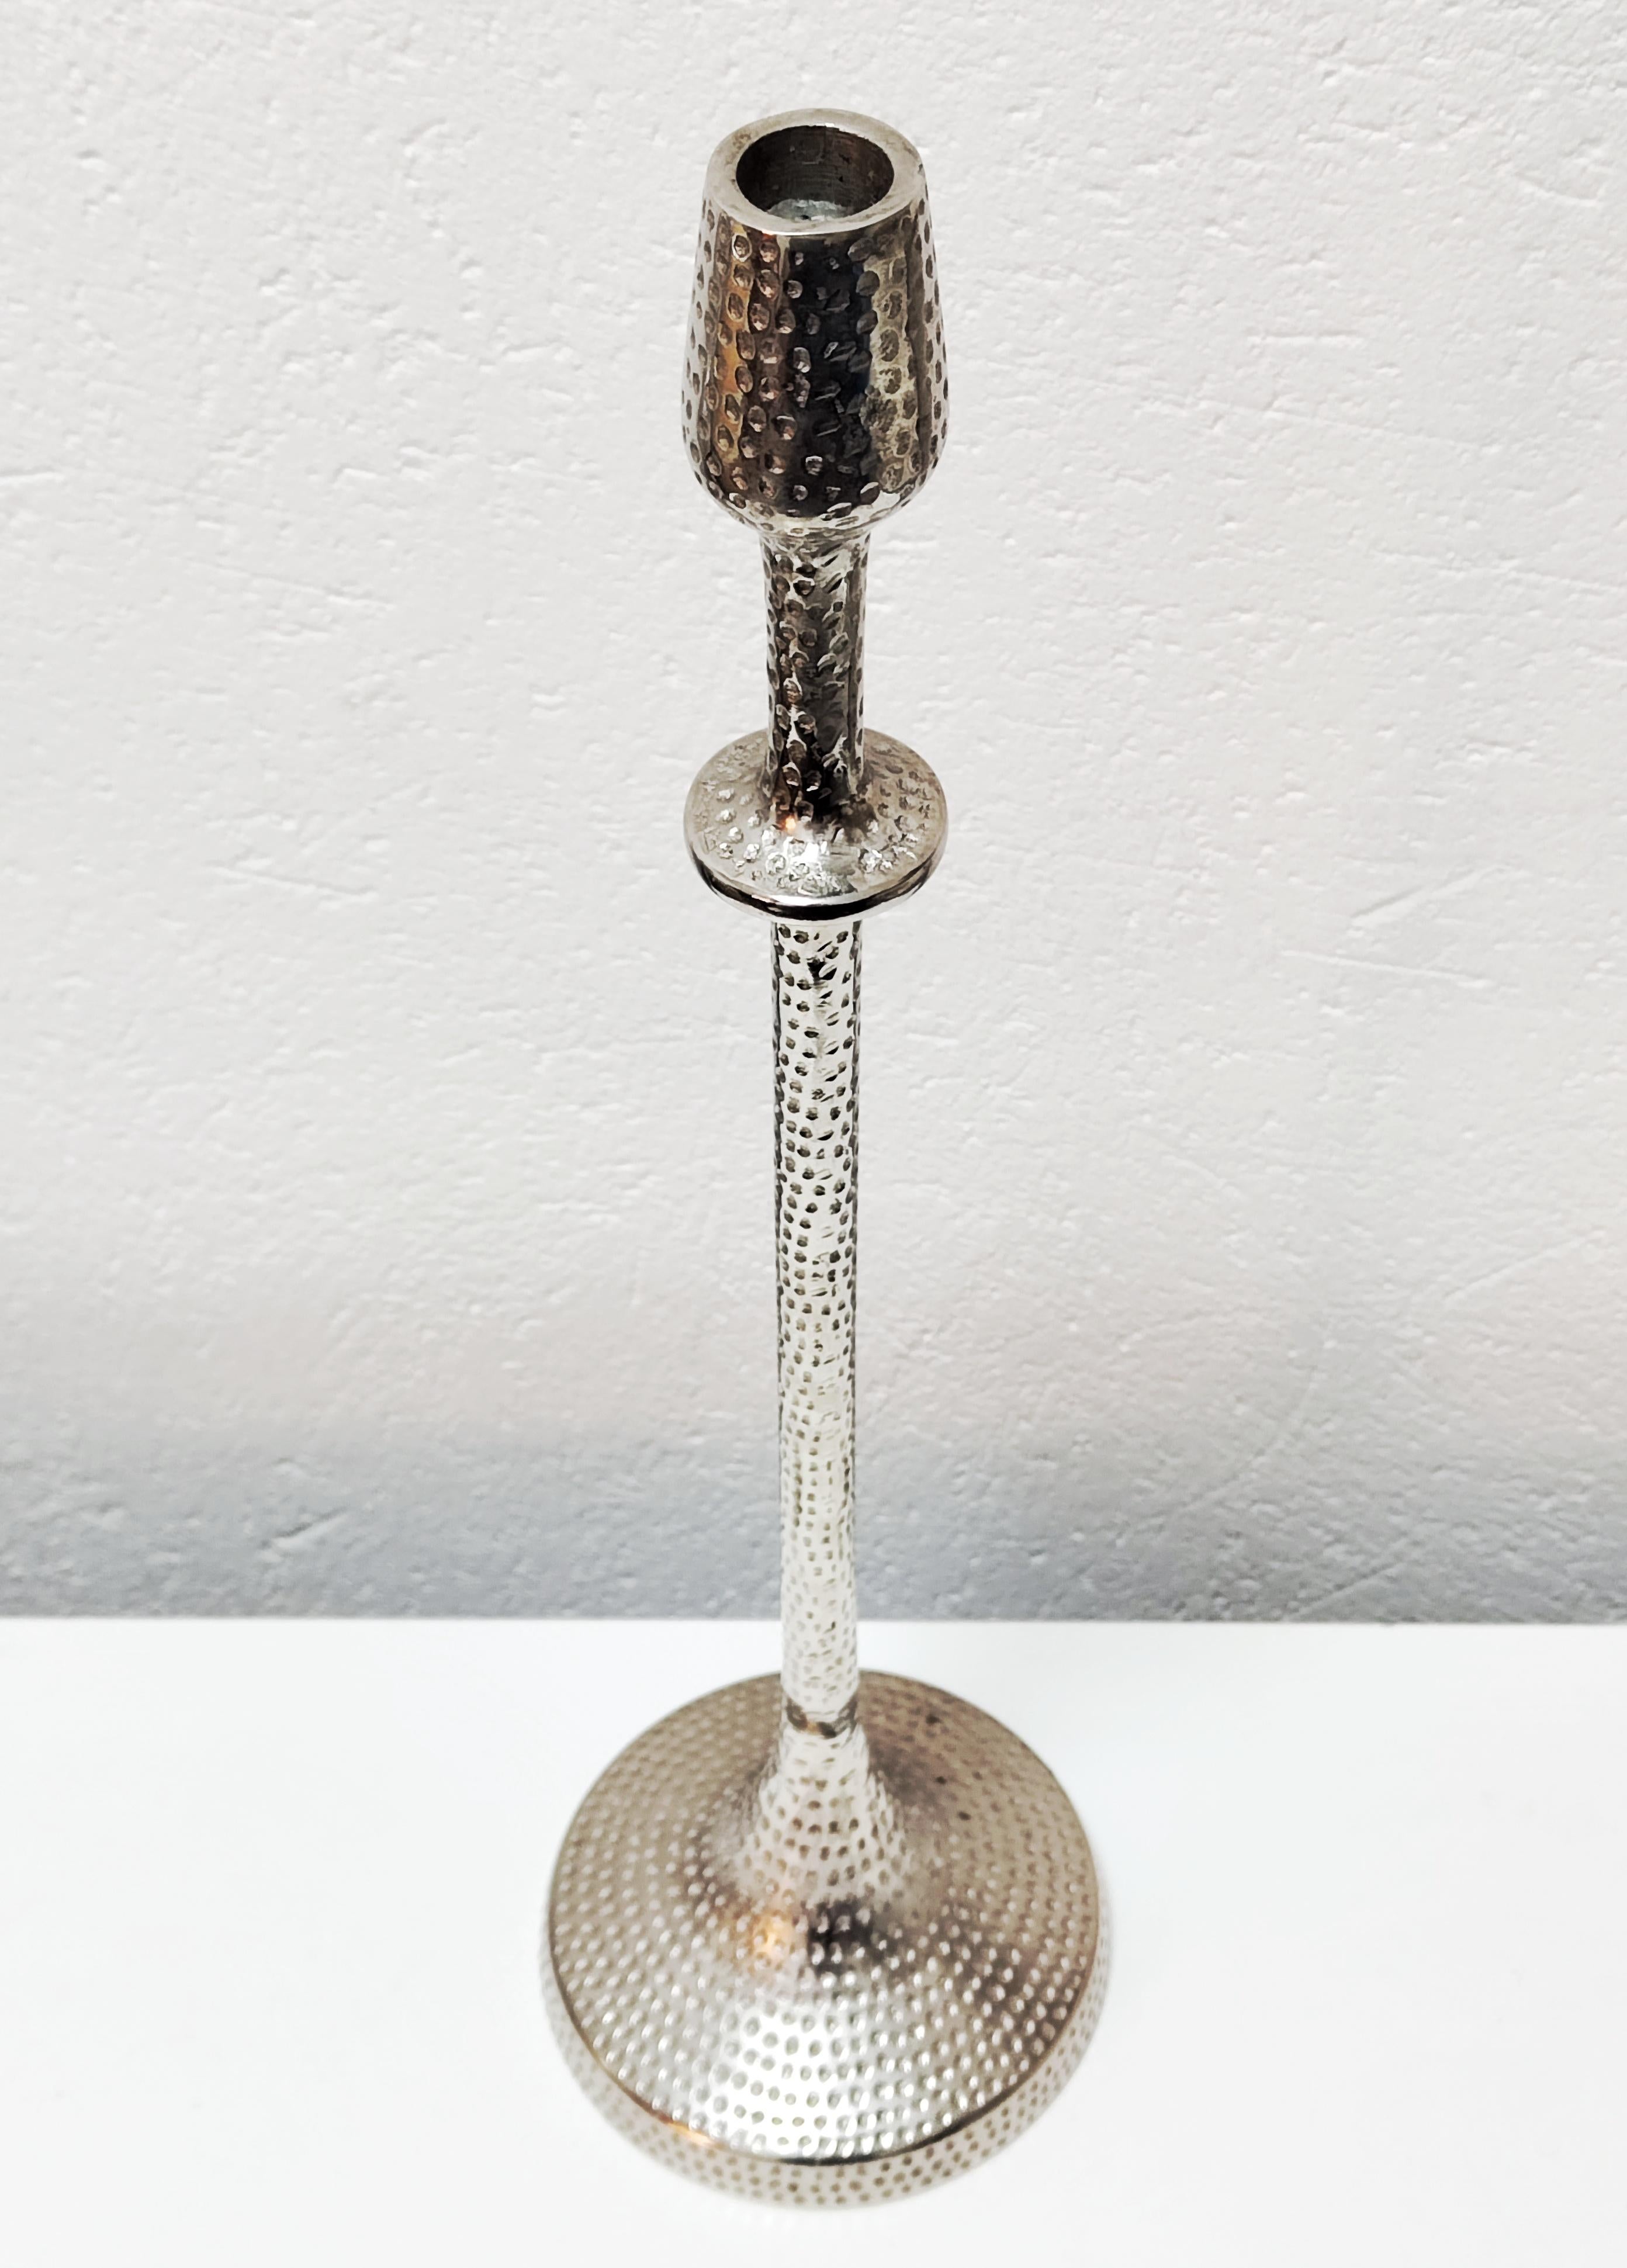 In this listing you will find a large Brutalist candlestick holder designed by Gunther Lambert. The candlestick holder is done in hammered aluminum, featuring beautiful and sleek design. Made in West Germany in 1970s.

Very good vintage condition